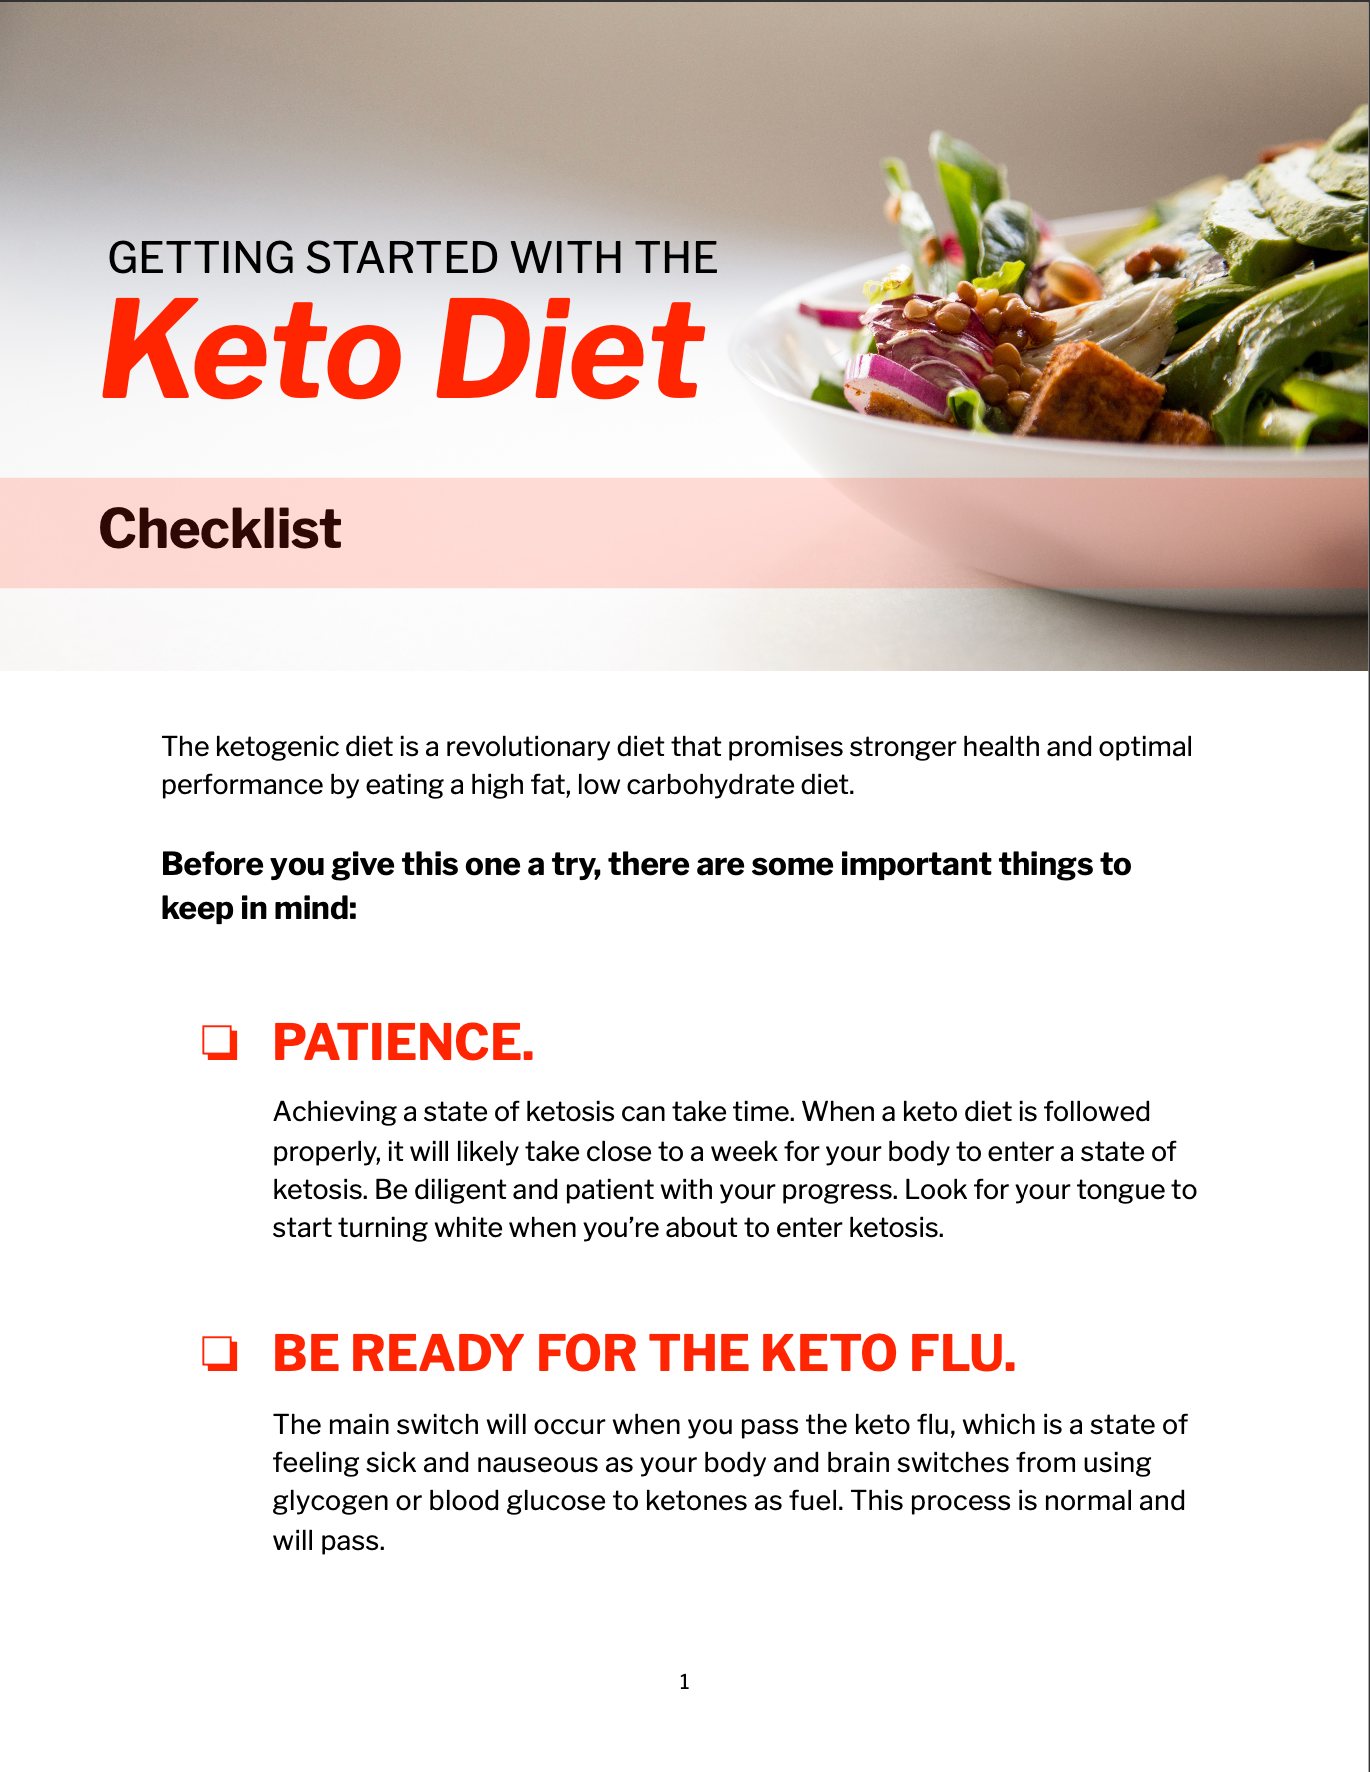 Get to Know Tips and Tricks to do Simple Keto Diet from Scratch